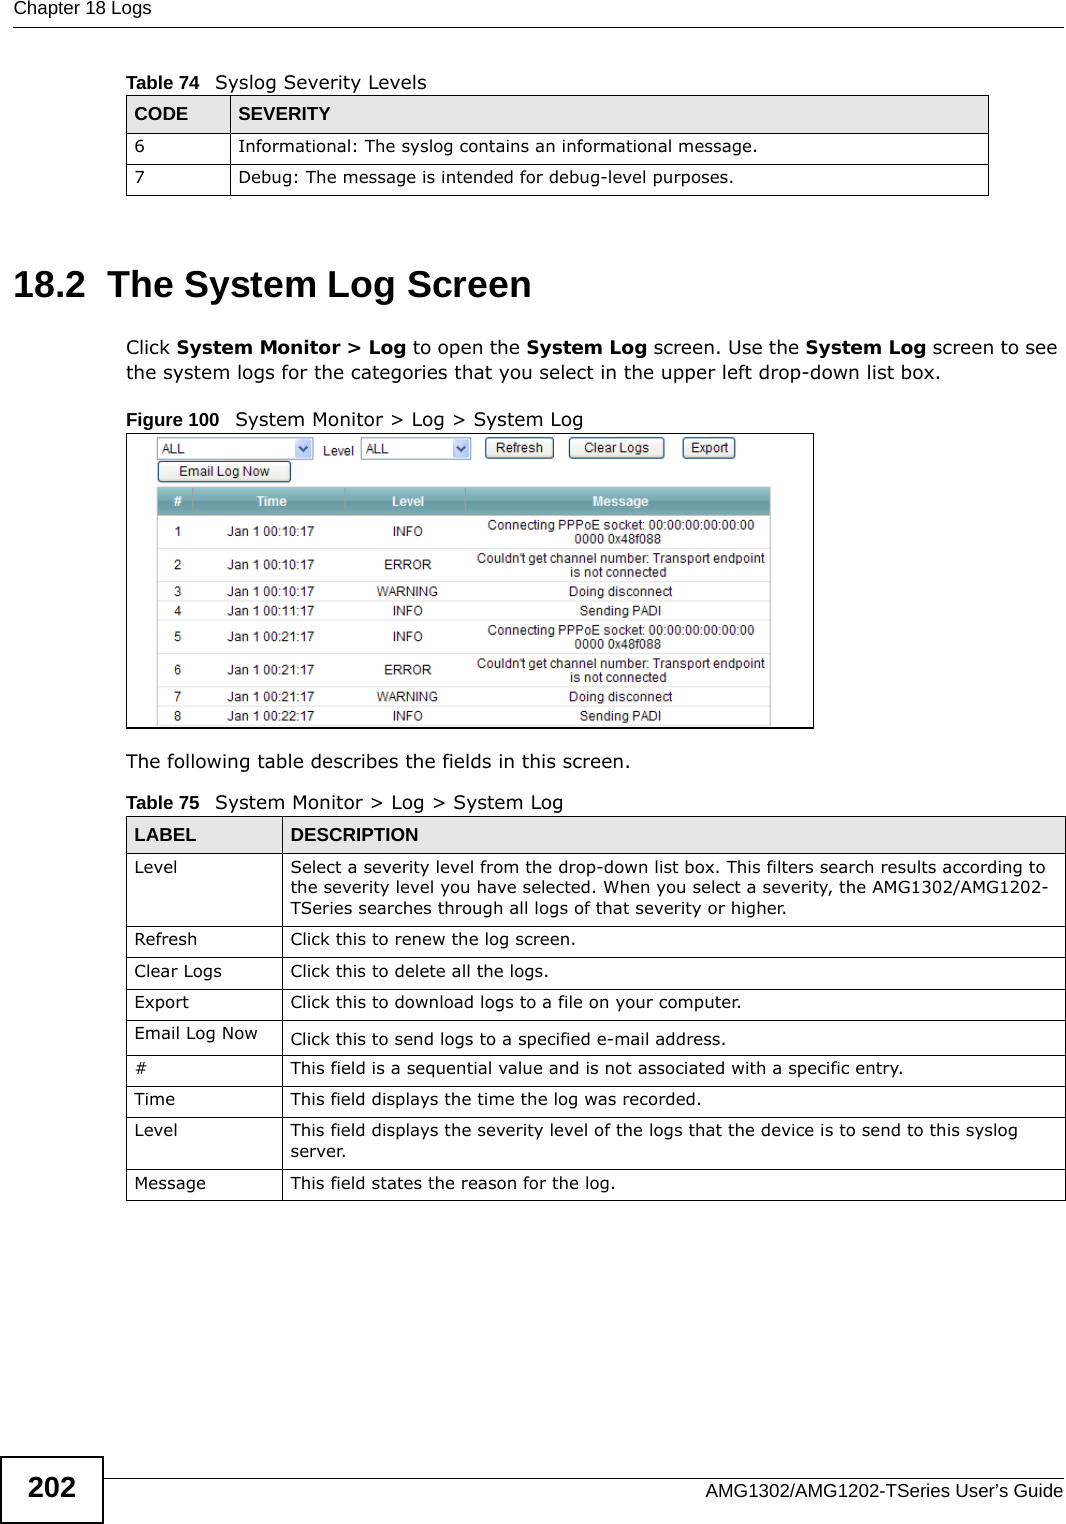 Chapter 18 LogsAMG1302/AMG1202-TSeries User’s Guide20218.2  The System Log Screen Click System Monitor &gt; Log to open the System Log screen. Use the System Log screen to see the system logs for the categories that you select in the upper left drop-down list box. Figure 100   System Monitor &gt; Log &gt; System LogThe following table describes the fields in this screen.6 Informational: The syslog contains an informational message.7 Debug: The message is intended for debug-level purposes.Table 74   Syslog Severity LevelsCODE SEVERITYTable 75   System Monitor &gt; Log &gt; System LogLABEL DESCRIPTIONLevel  Select a severity level from the drop-down list box. This filters search results according to the severity level you have selected. When you select a severity, the AMG1302/AMG1202-TSeries searches through all logs of that severity or higher. Refresh Click this to renew the log screen. Clear Logs Click this to delete all the logs. Export Click this to download logs to a file on your computer.Email Log Now Click this to send logs to a specified e-mail address.#This field is a sequential value and is not associated with a specific entry.Time  This field displays the time the log was recorded. Level This field displays the severity level of the logs that the device is to send to this syslog server.Message This field states the reason for the log.